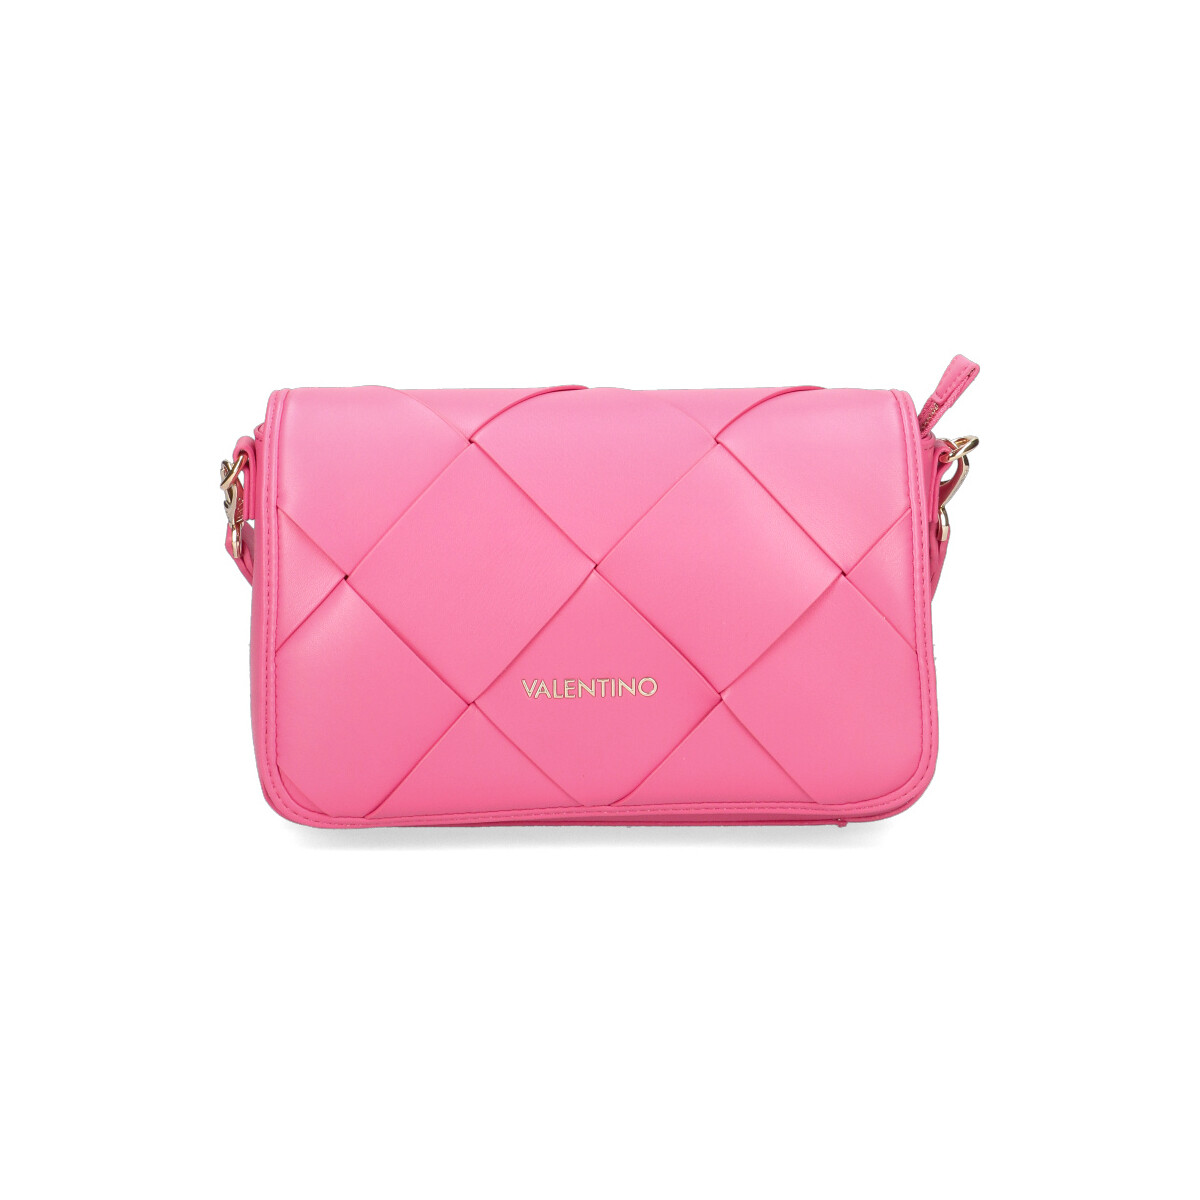 Sacs Femme Valentino Bags Exclusive Ocarina quilted cross body bag in antique pink Tracolla  Donna 